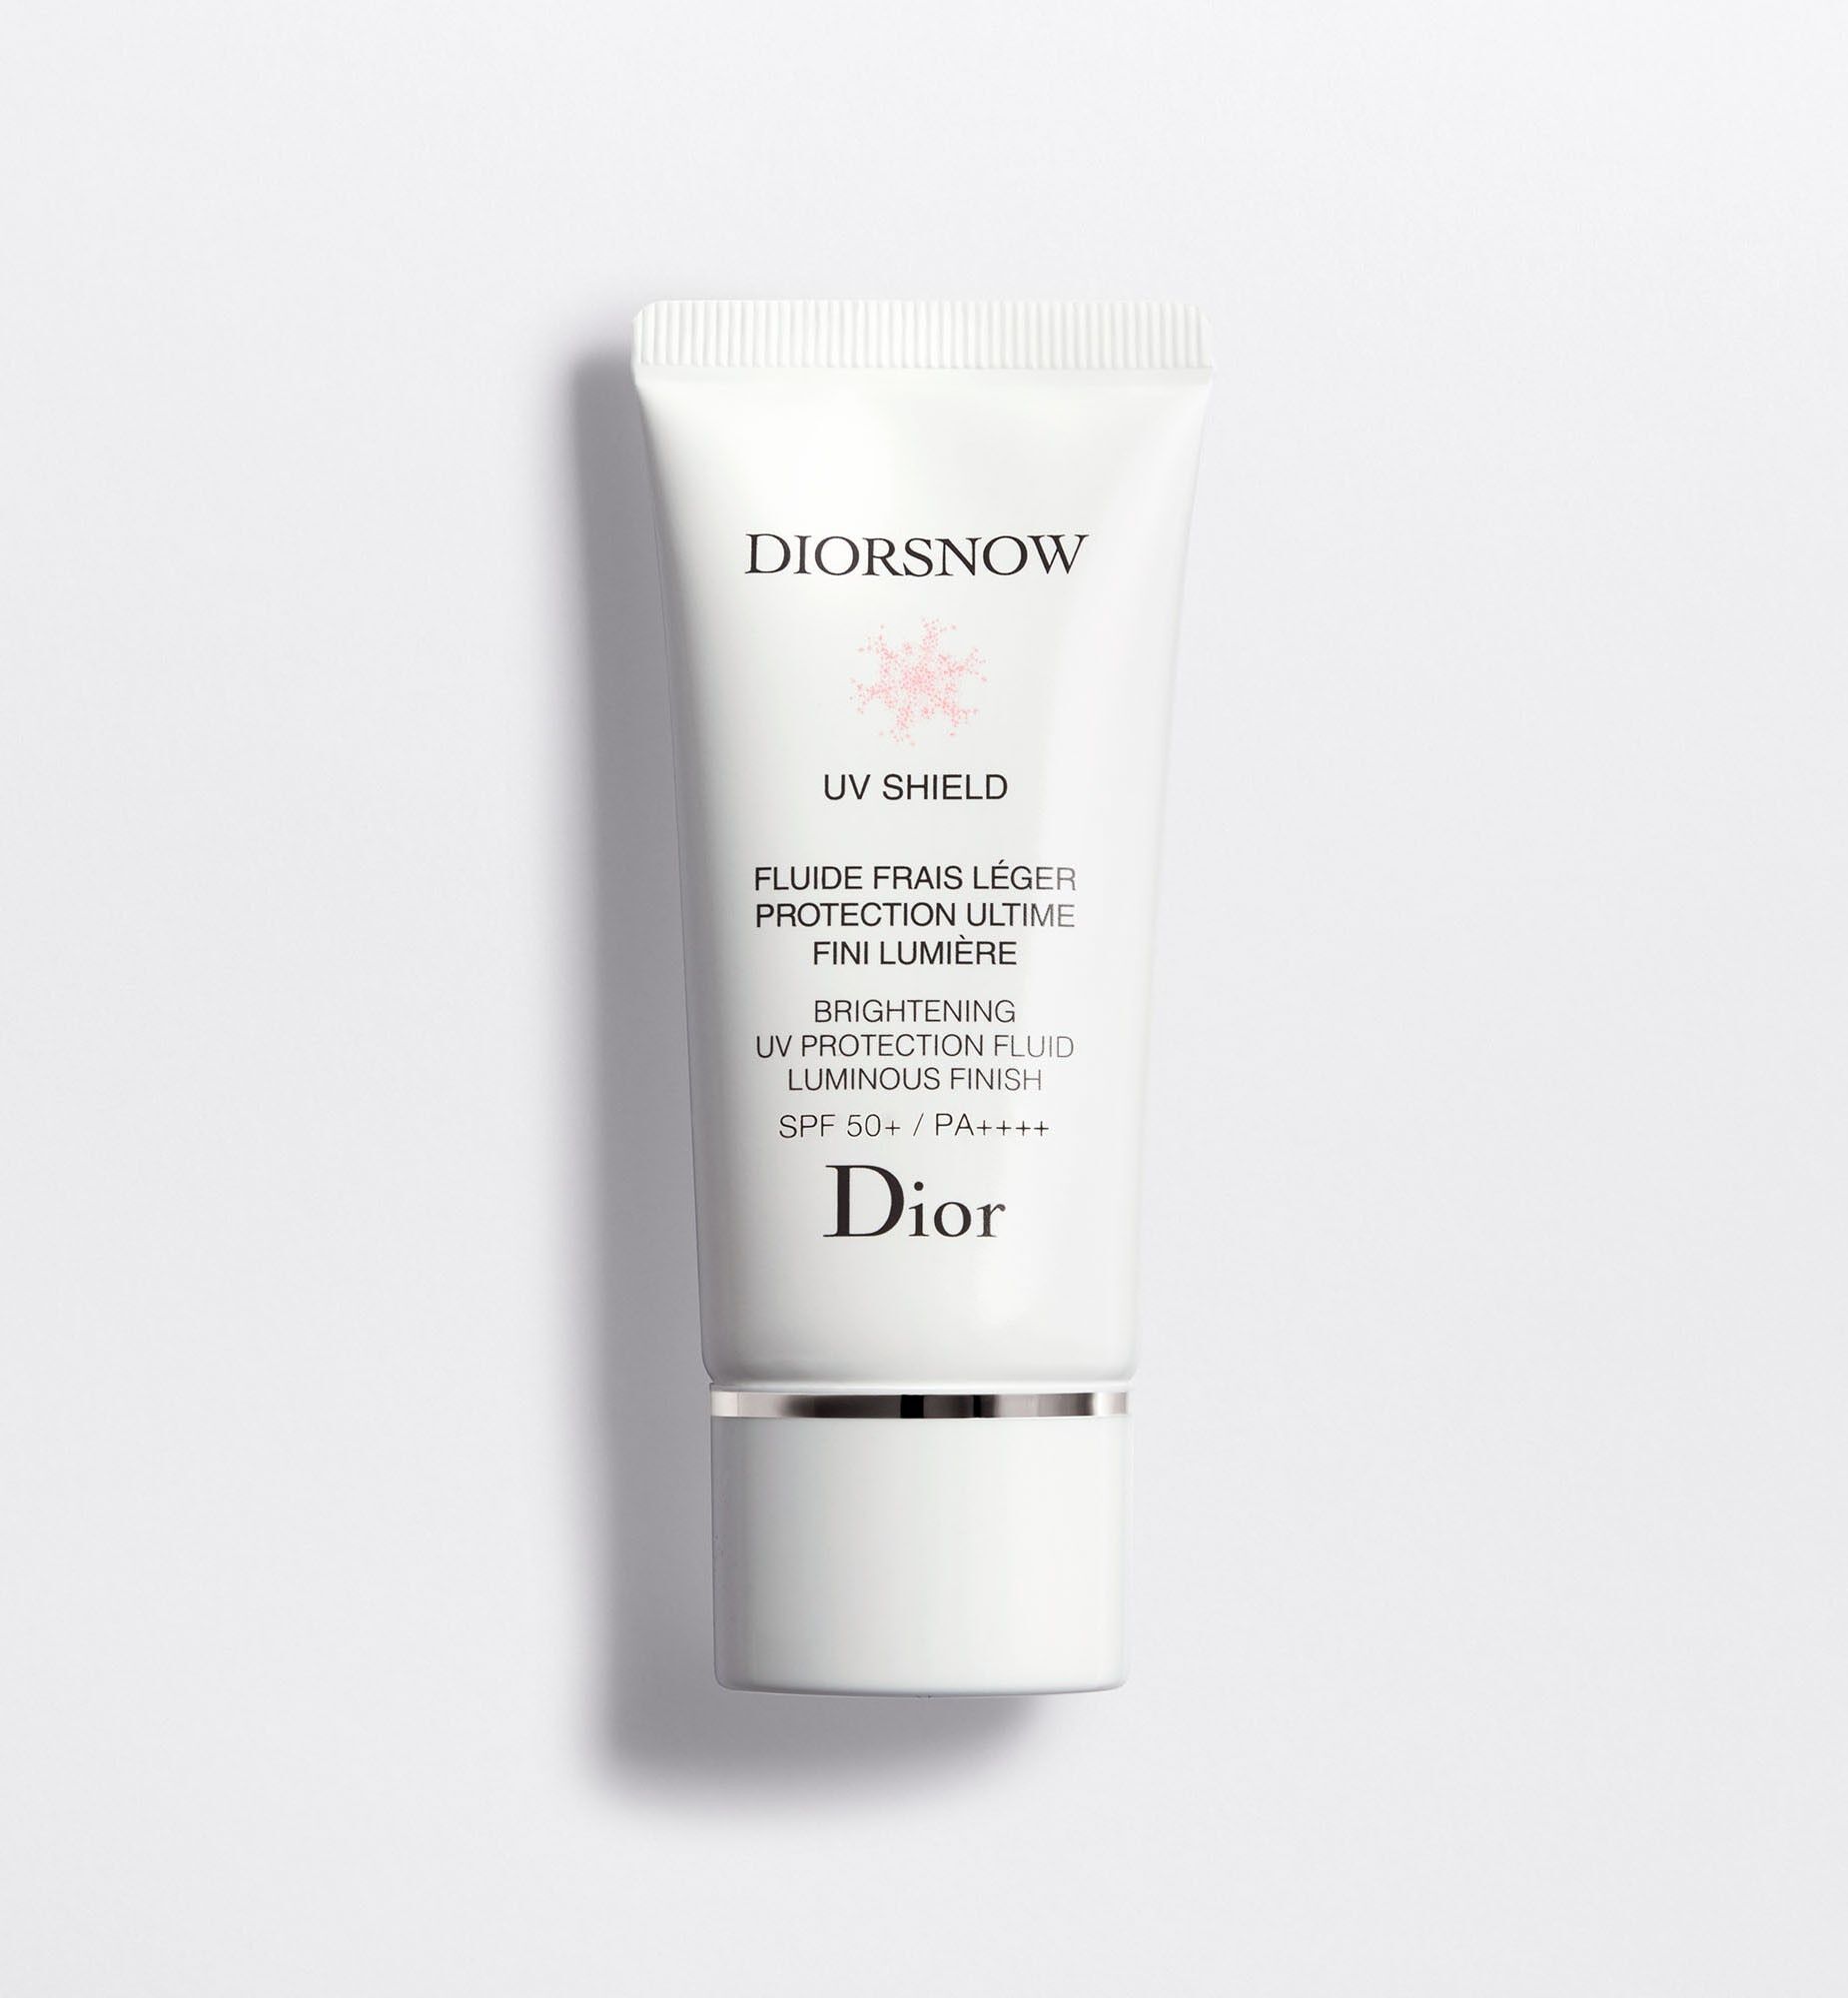 DIORSNOW ULTIMATE UV SHIELD TONE UP SPF 50 PA  SkinBreathable  Dior  Beauty Online Boutique Malaysia